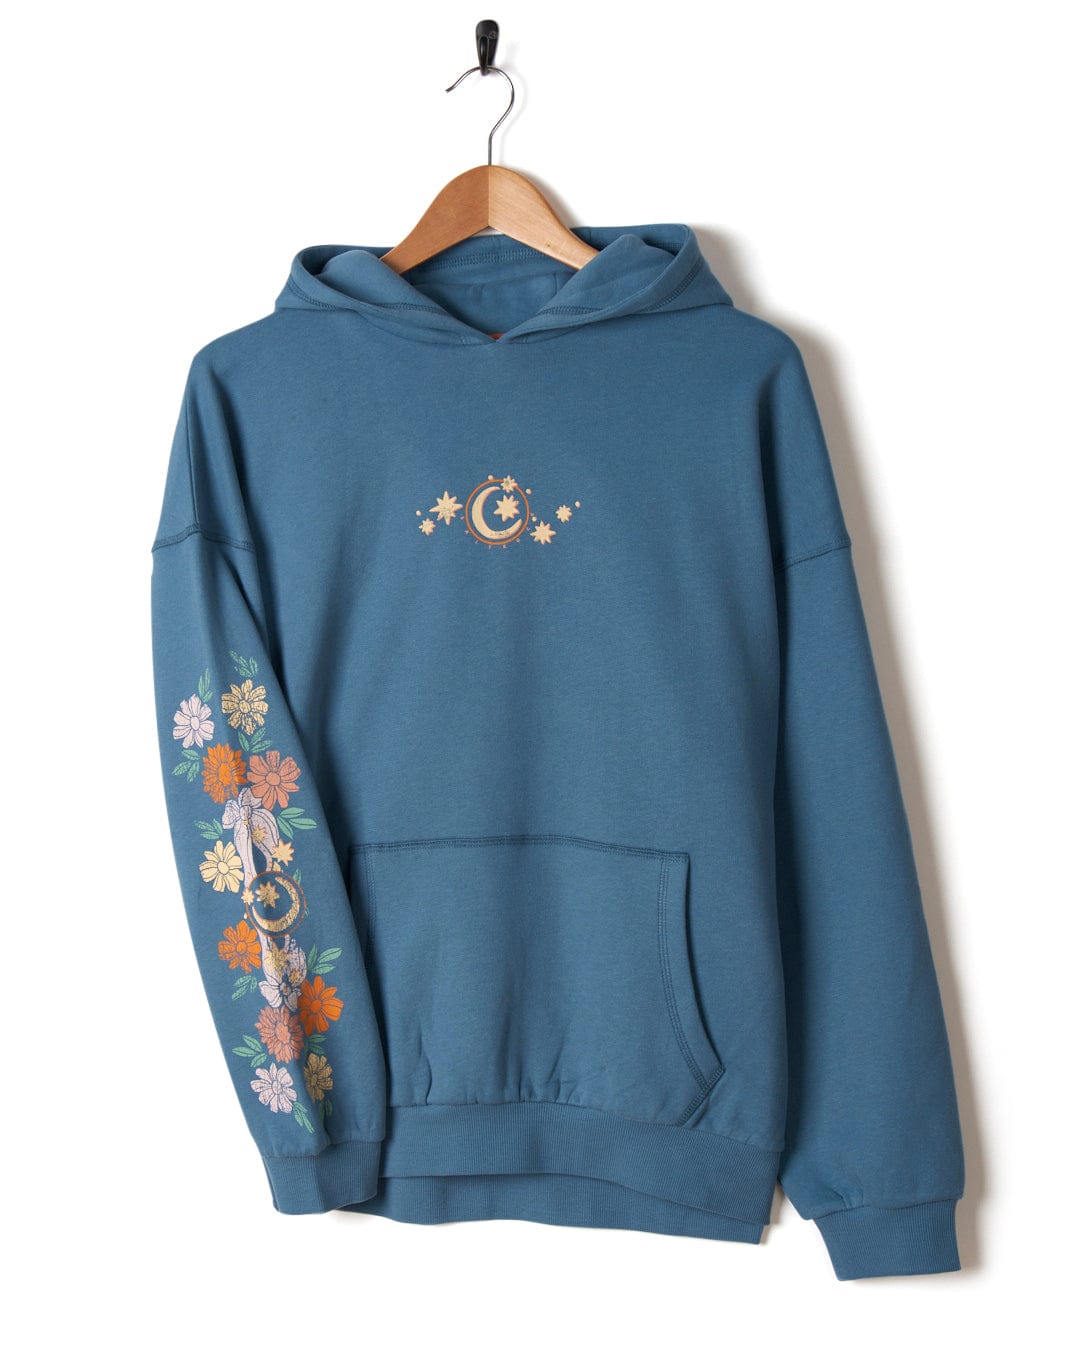 A Better Days - Womens Pop Hoodie in Blue by Saltrock with celestial and Luna designs on the sleeve hangs on a wooden hanger against a white background.